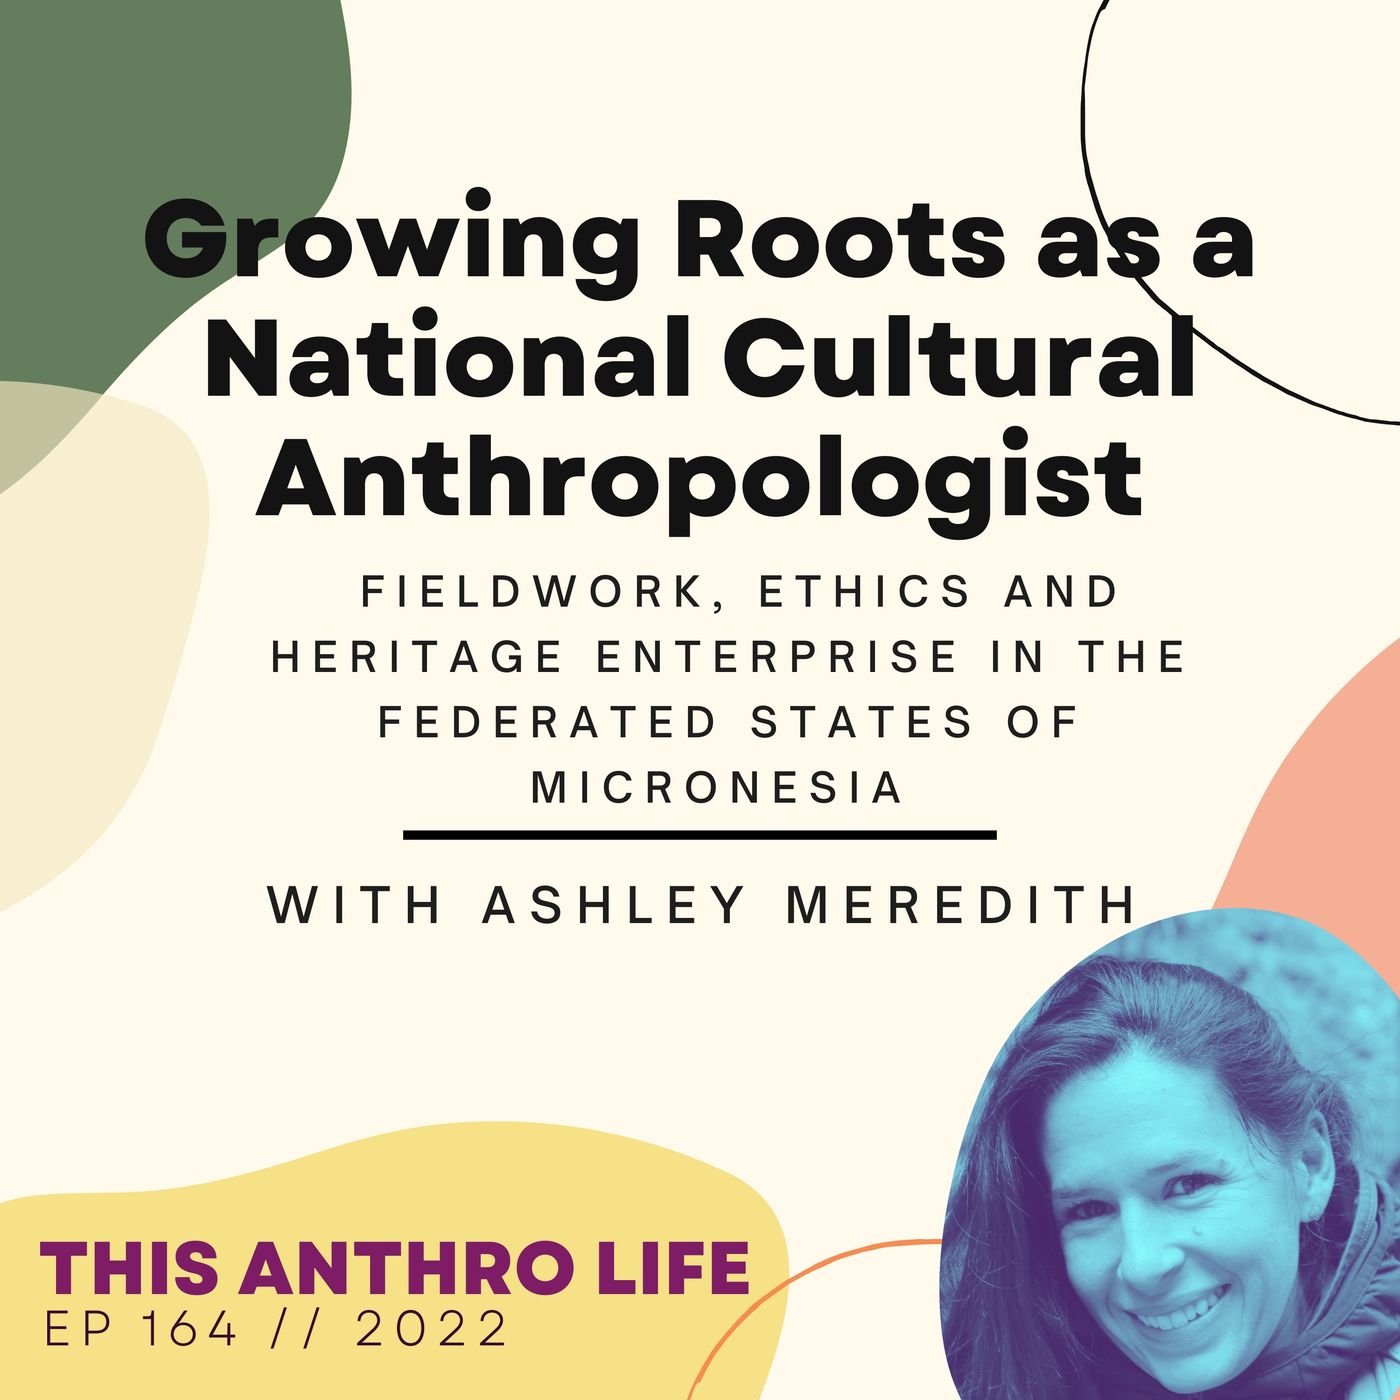 Growing Roots as a National Cultural Anthropologist with Ashley Meredith Image